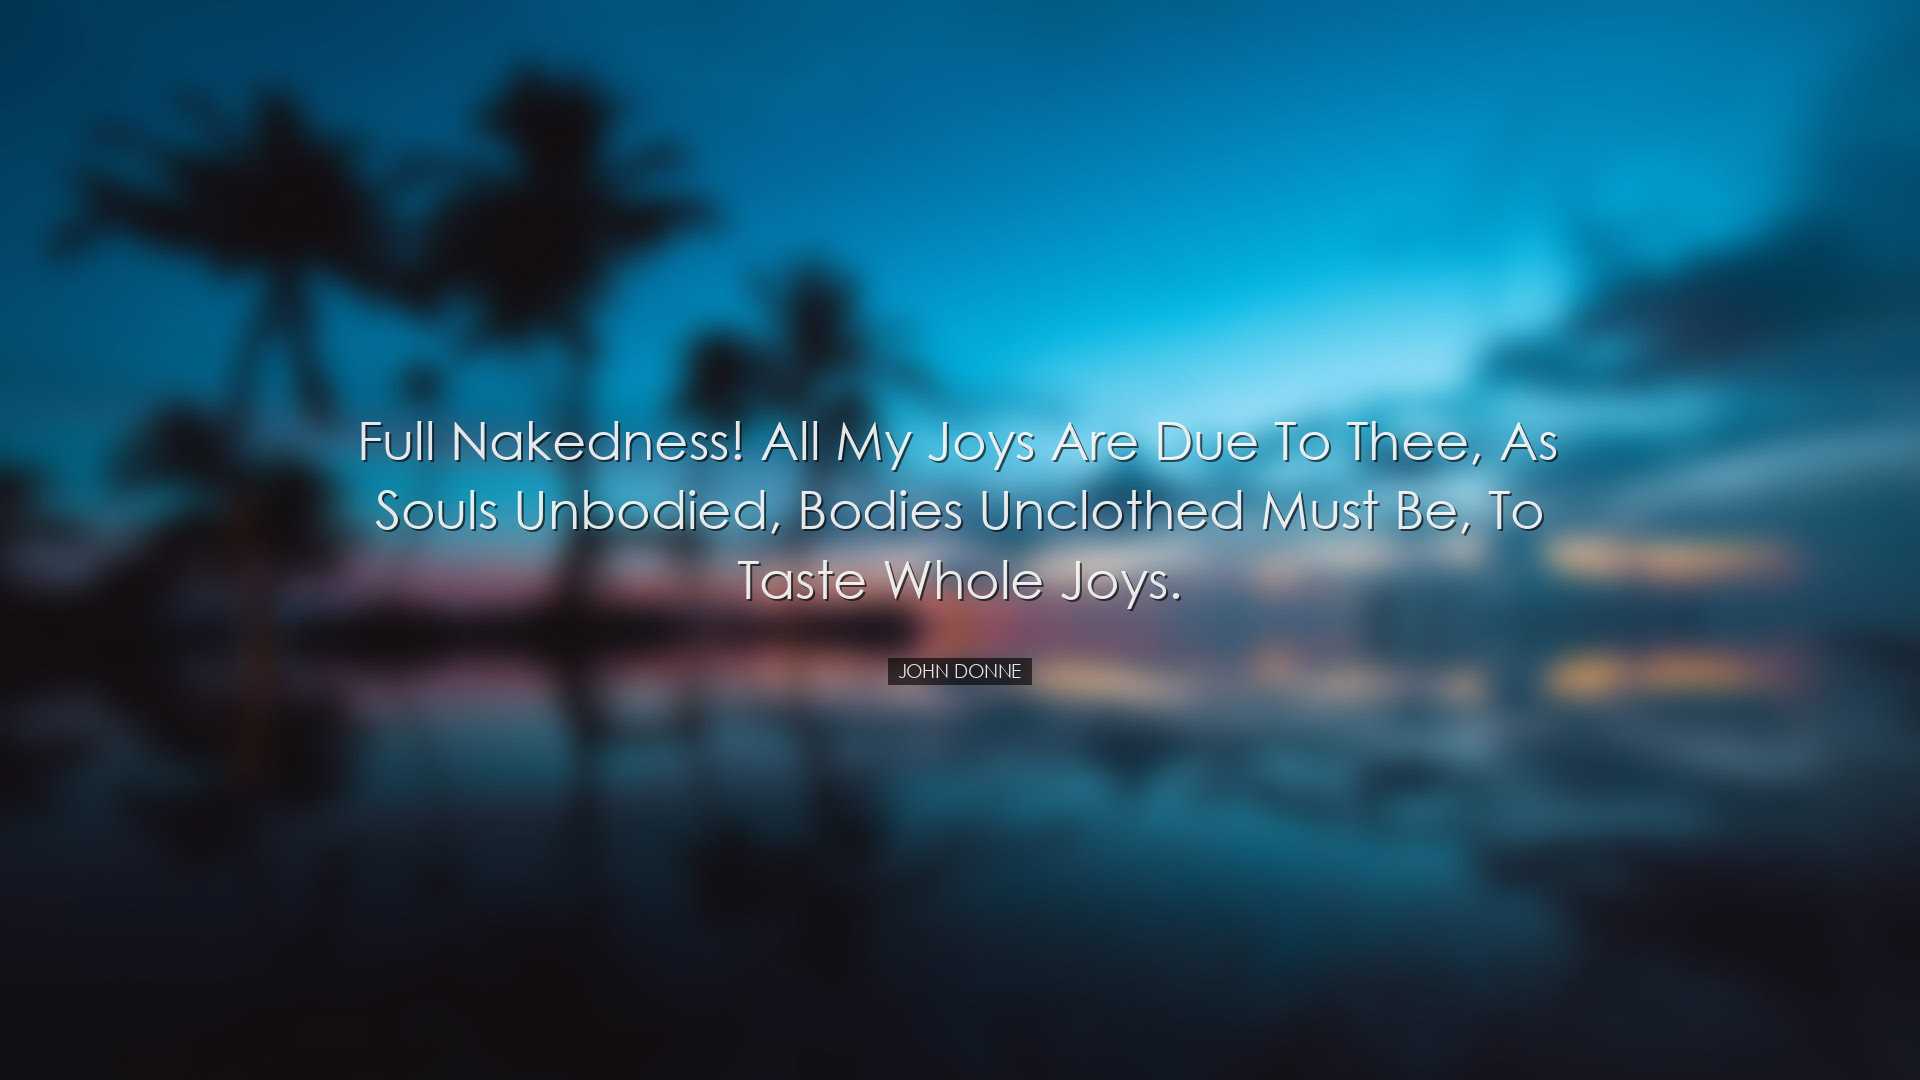 Full nakedness! All my joys are due to thee, as souls unbodied, bo